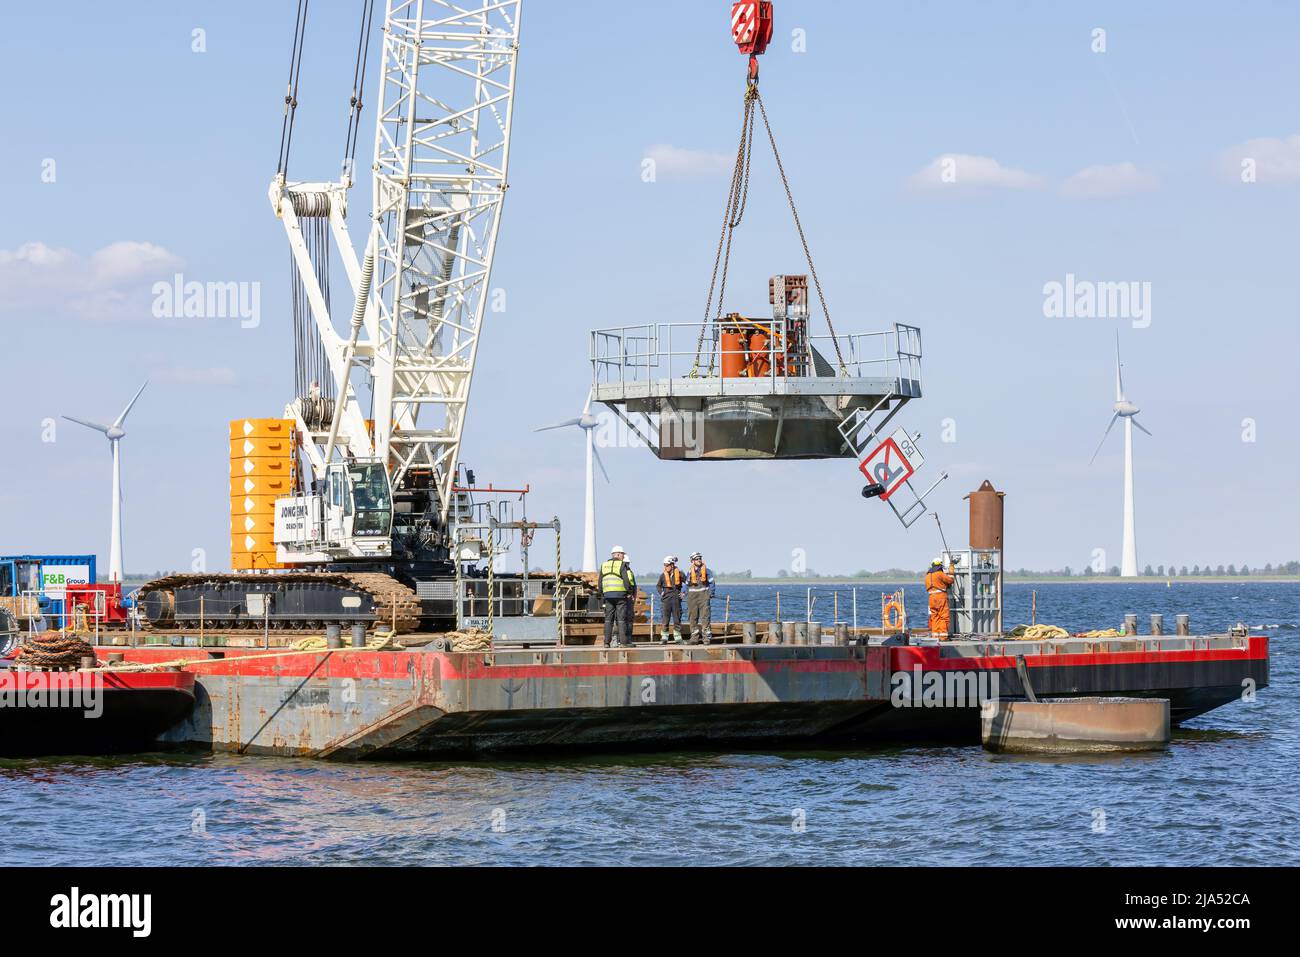 Lelystad, The Netherlands - April 22, 2022: Crane ship lifting foundation by demolition old offshore wind turbine Stock Photo